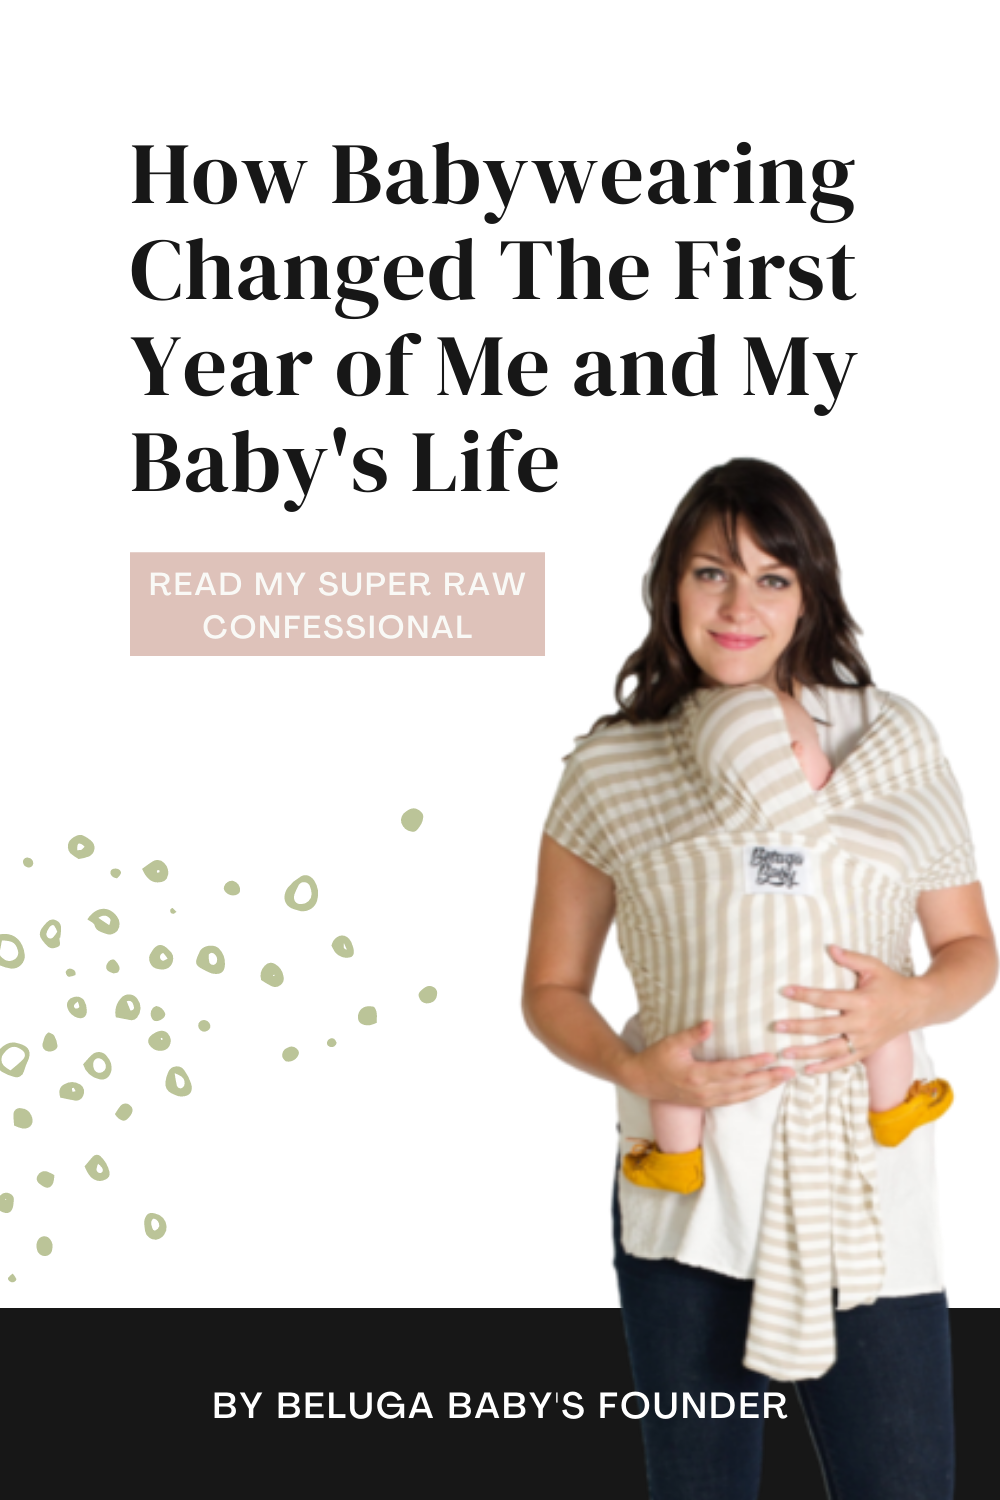 How A Baby Wrap Changed The First Year of Me and My Baby's Life